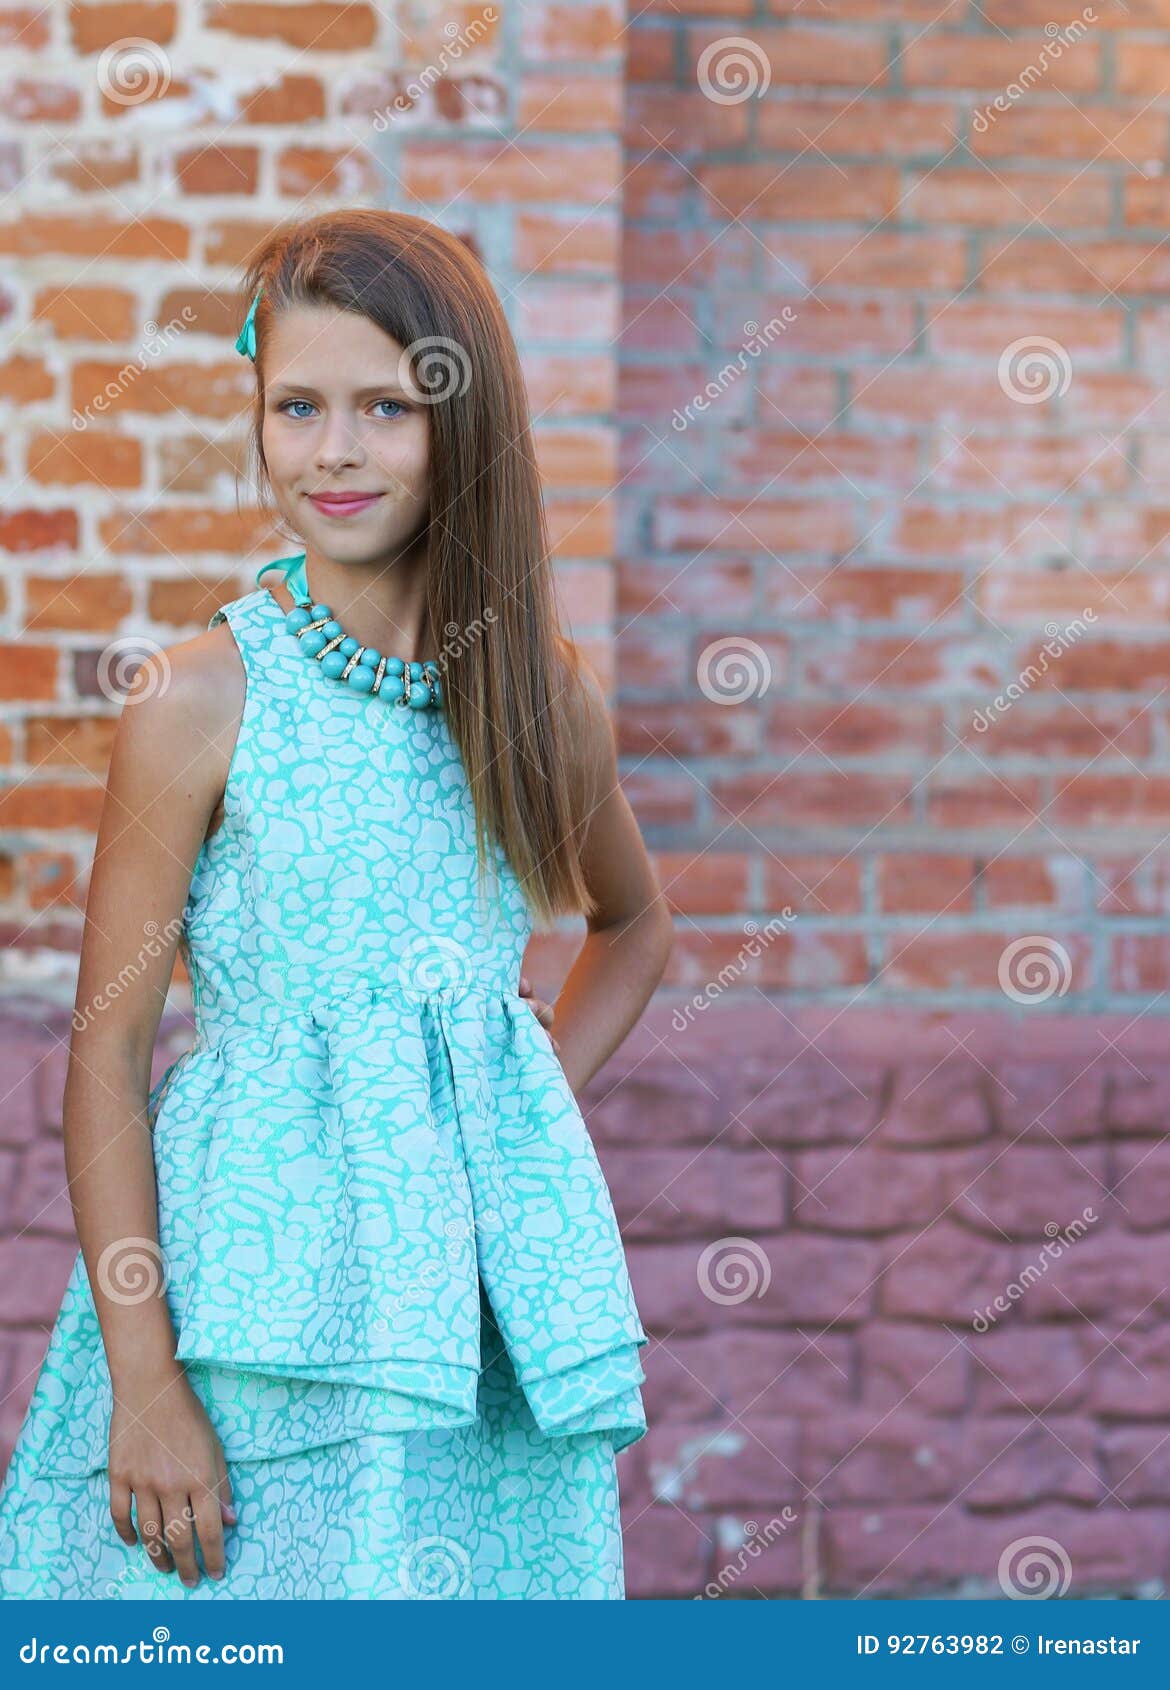 Portrait of a Beautiful Girl in a Blue Dress Stock Photo - Image of ...